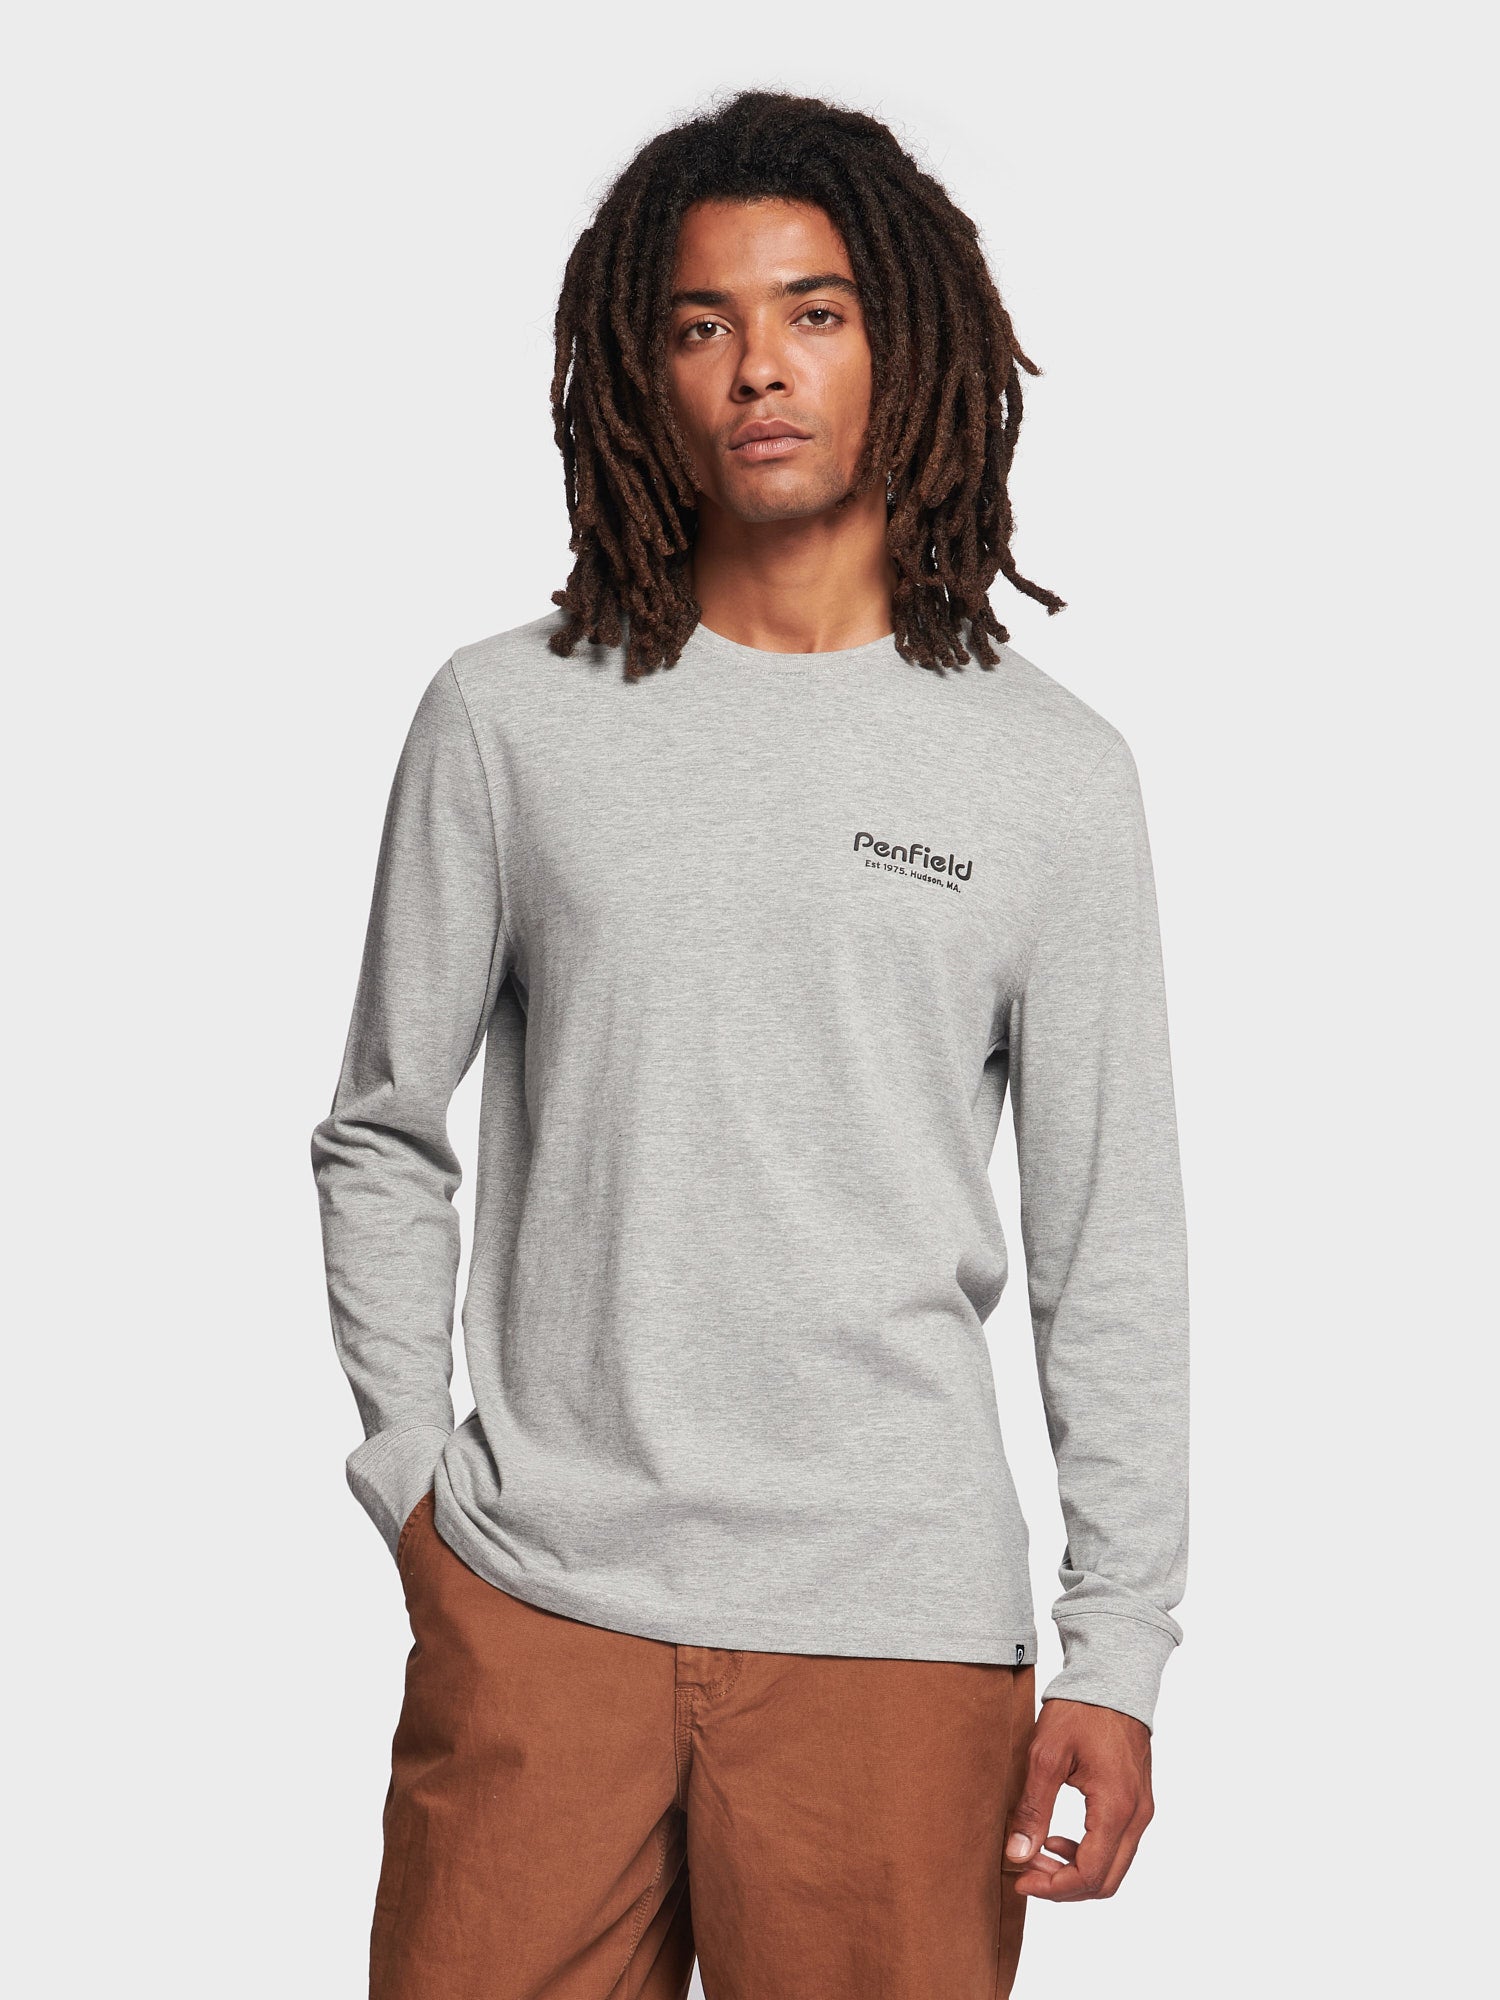 Arc Mountain Long Sleeve T-Shirt in Vintage Grey Heather